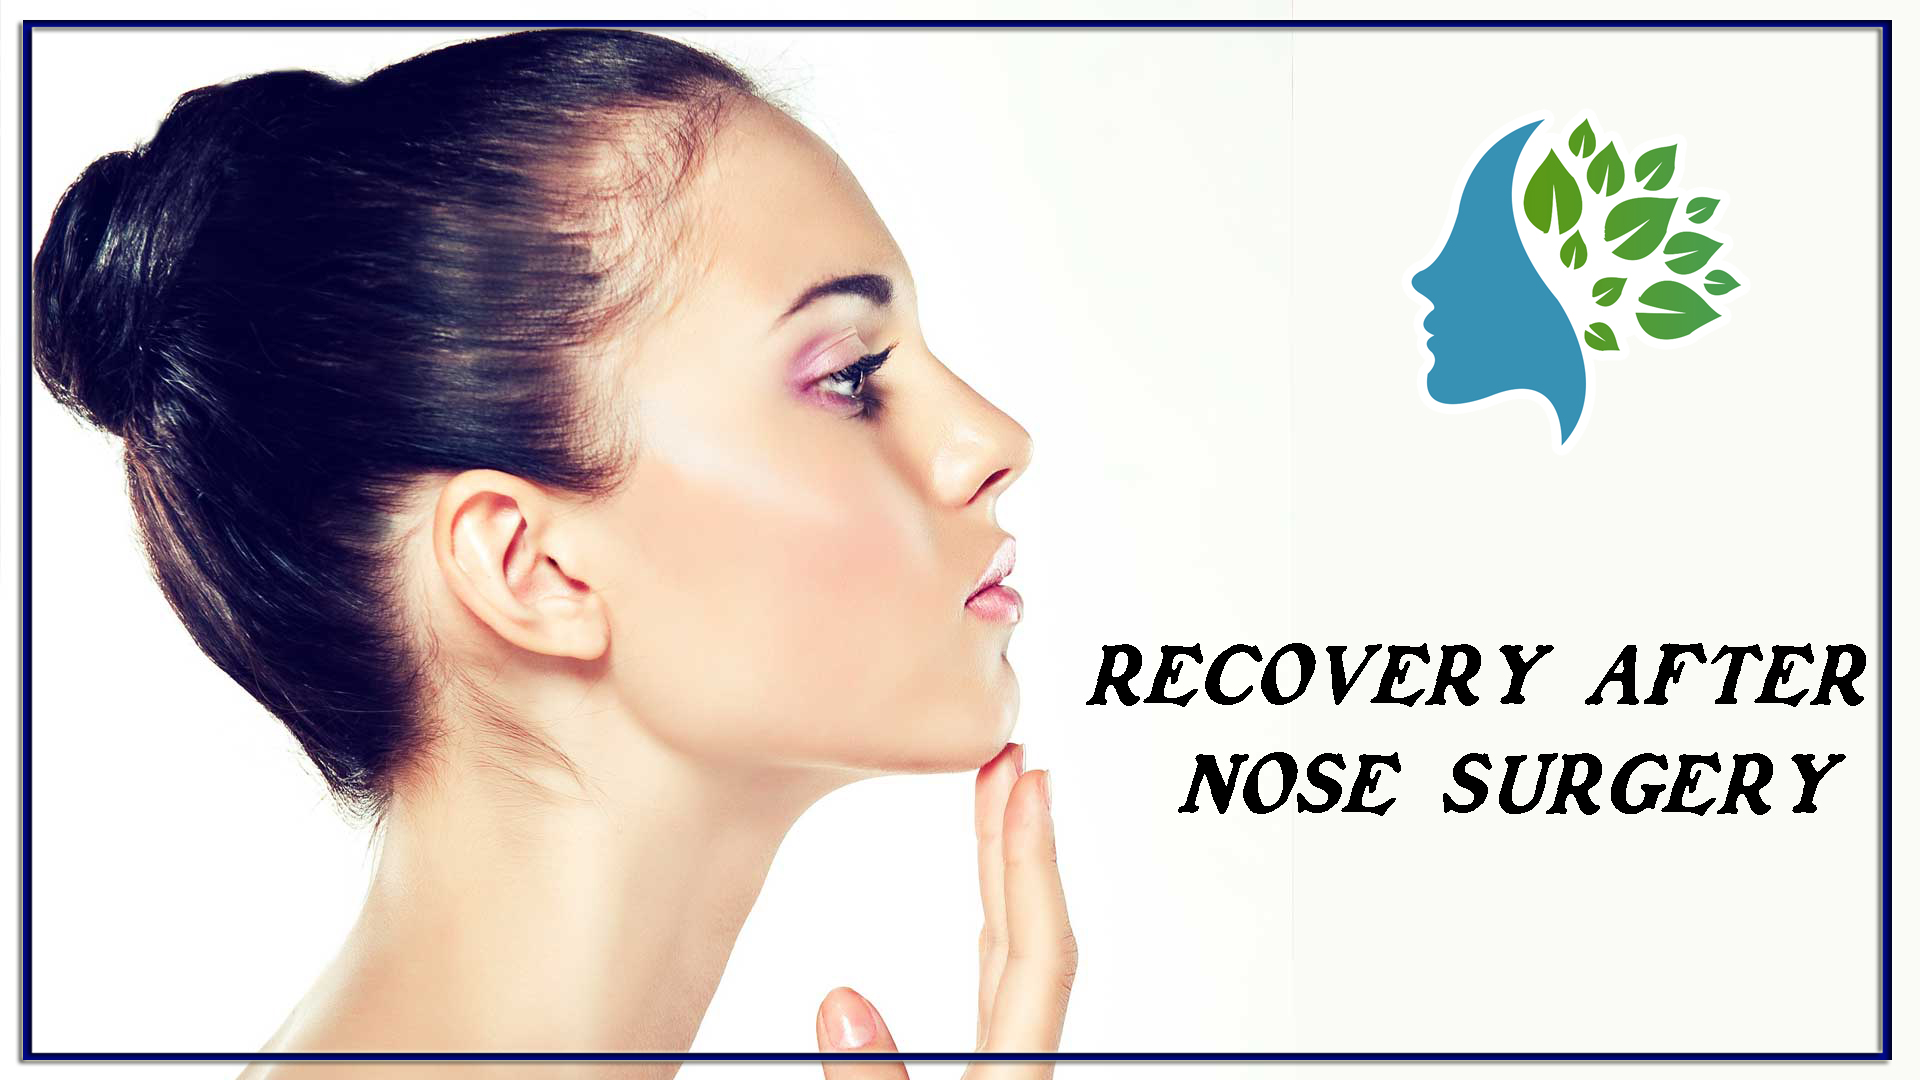 Recovery after nose surgery